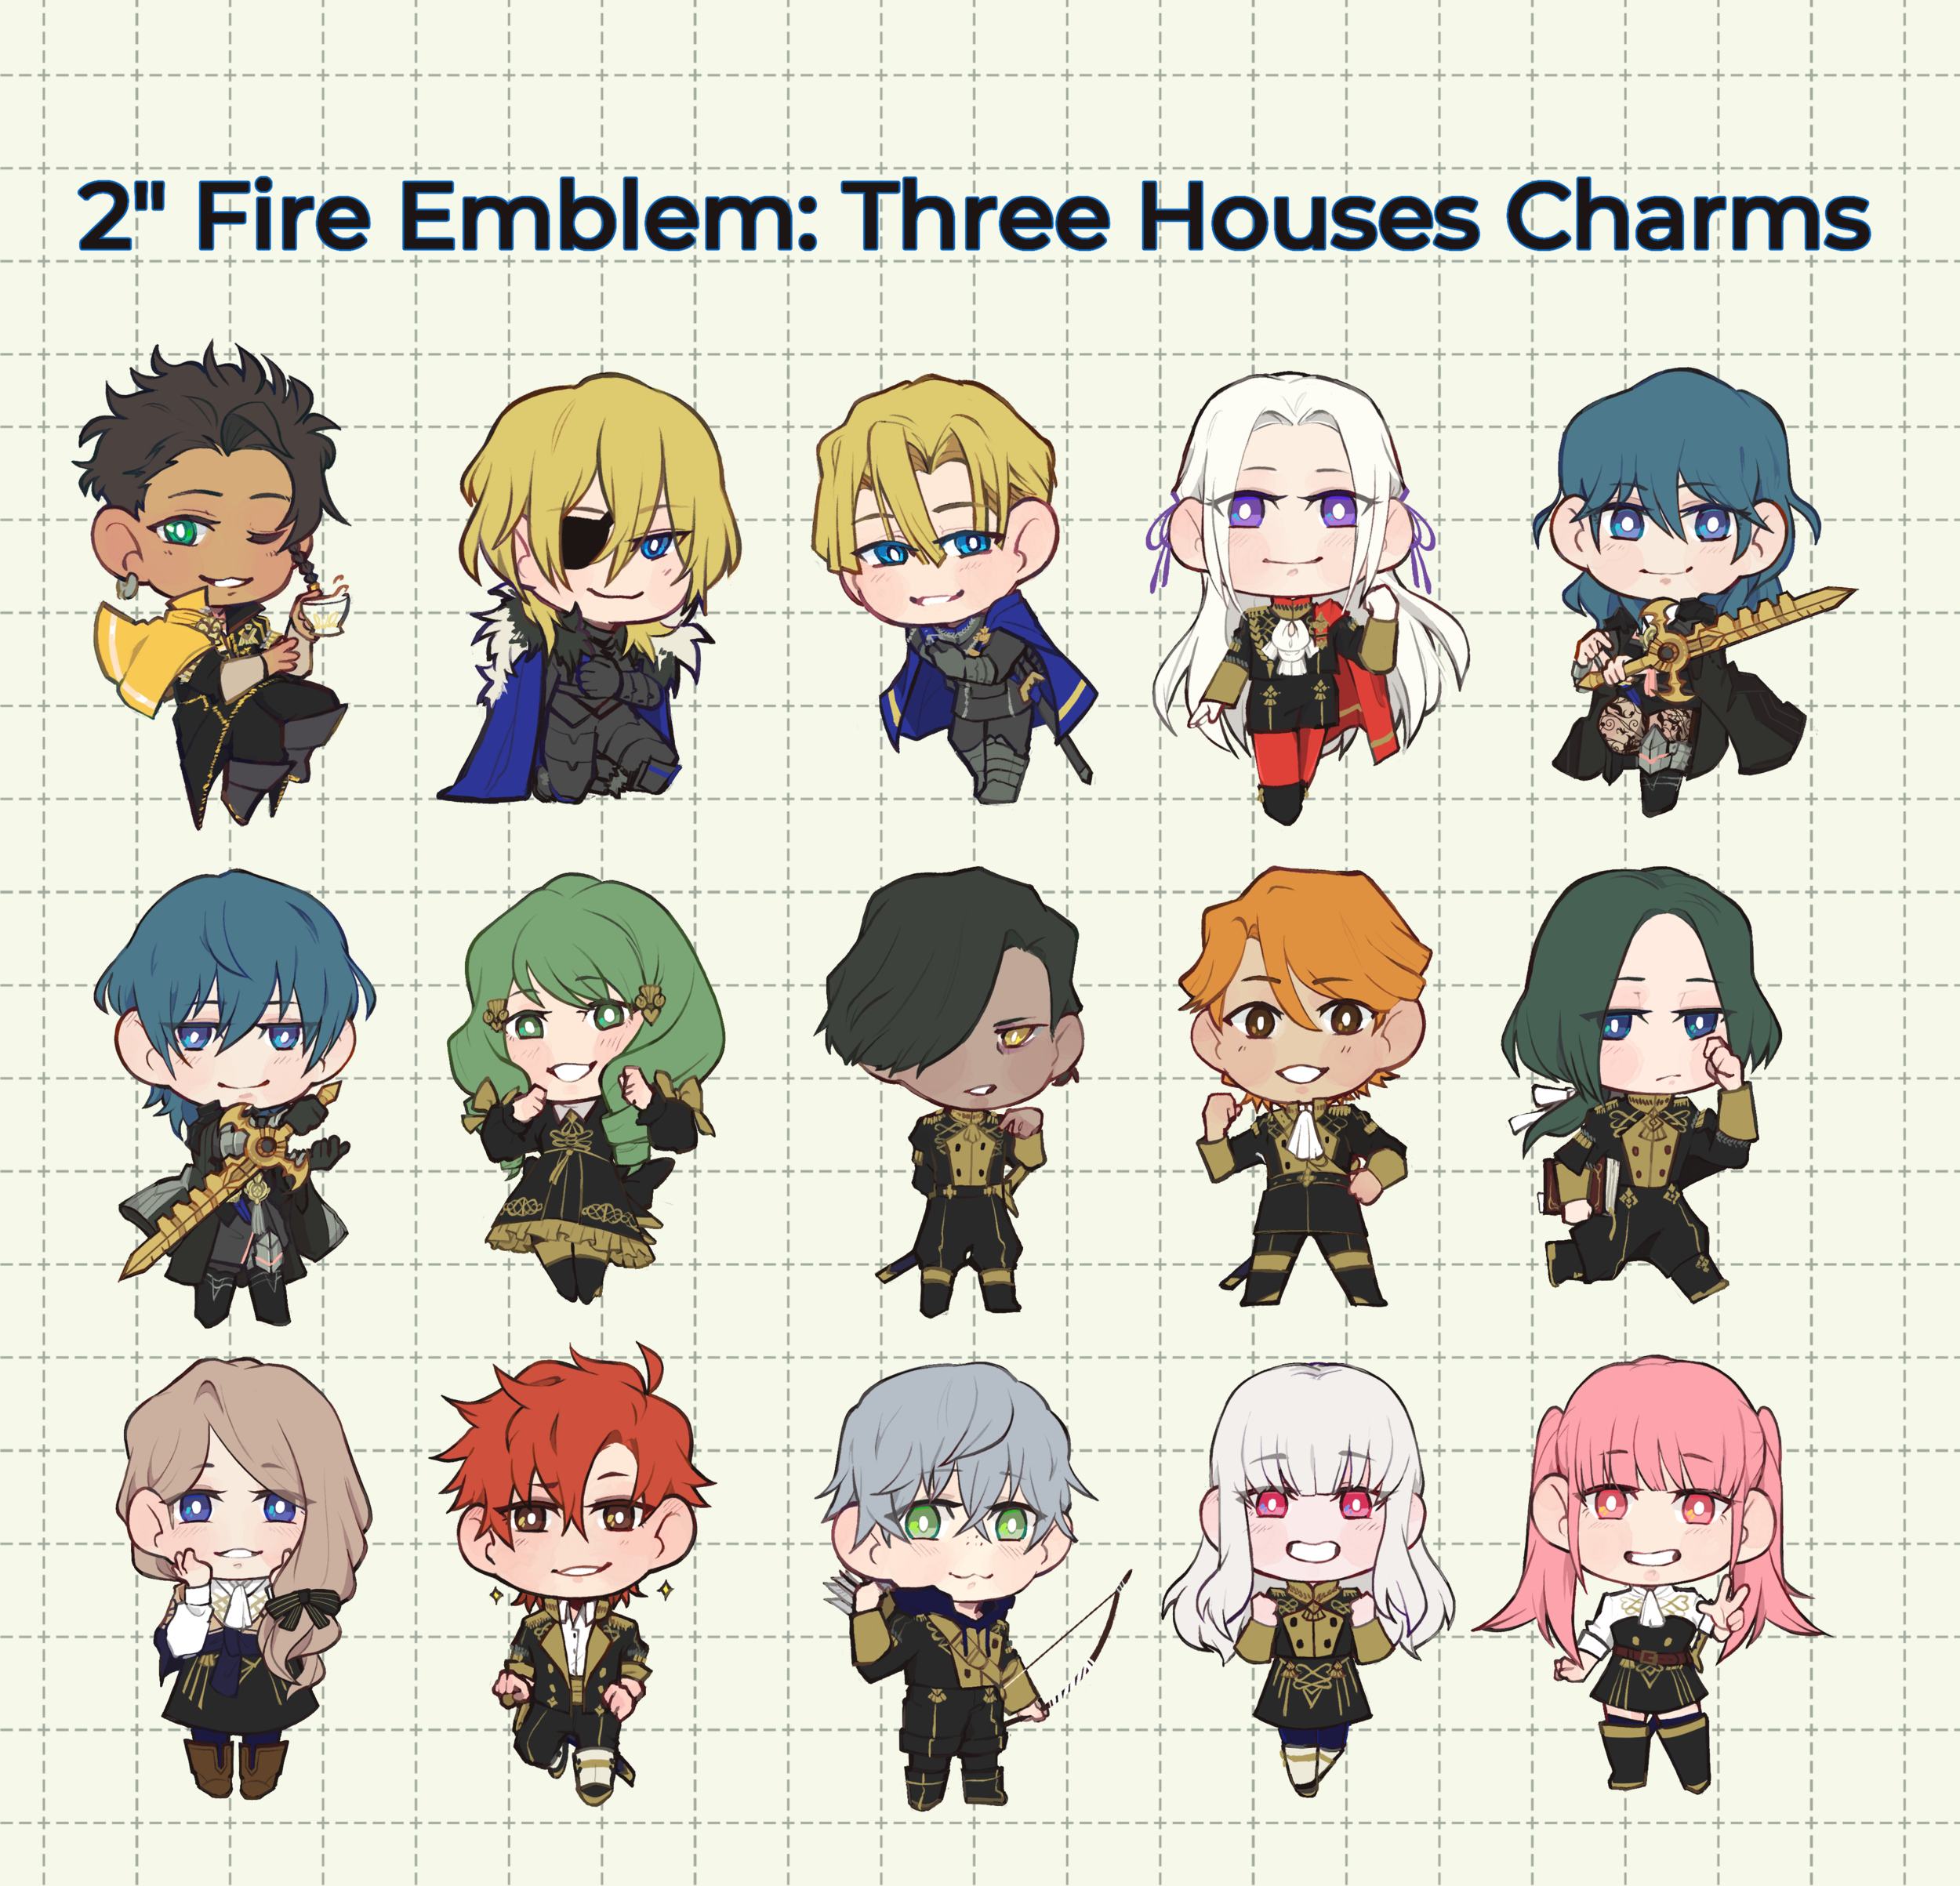 FE3H CHARMS2.png